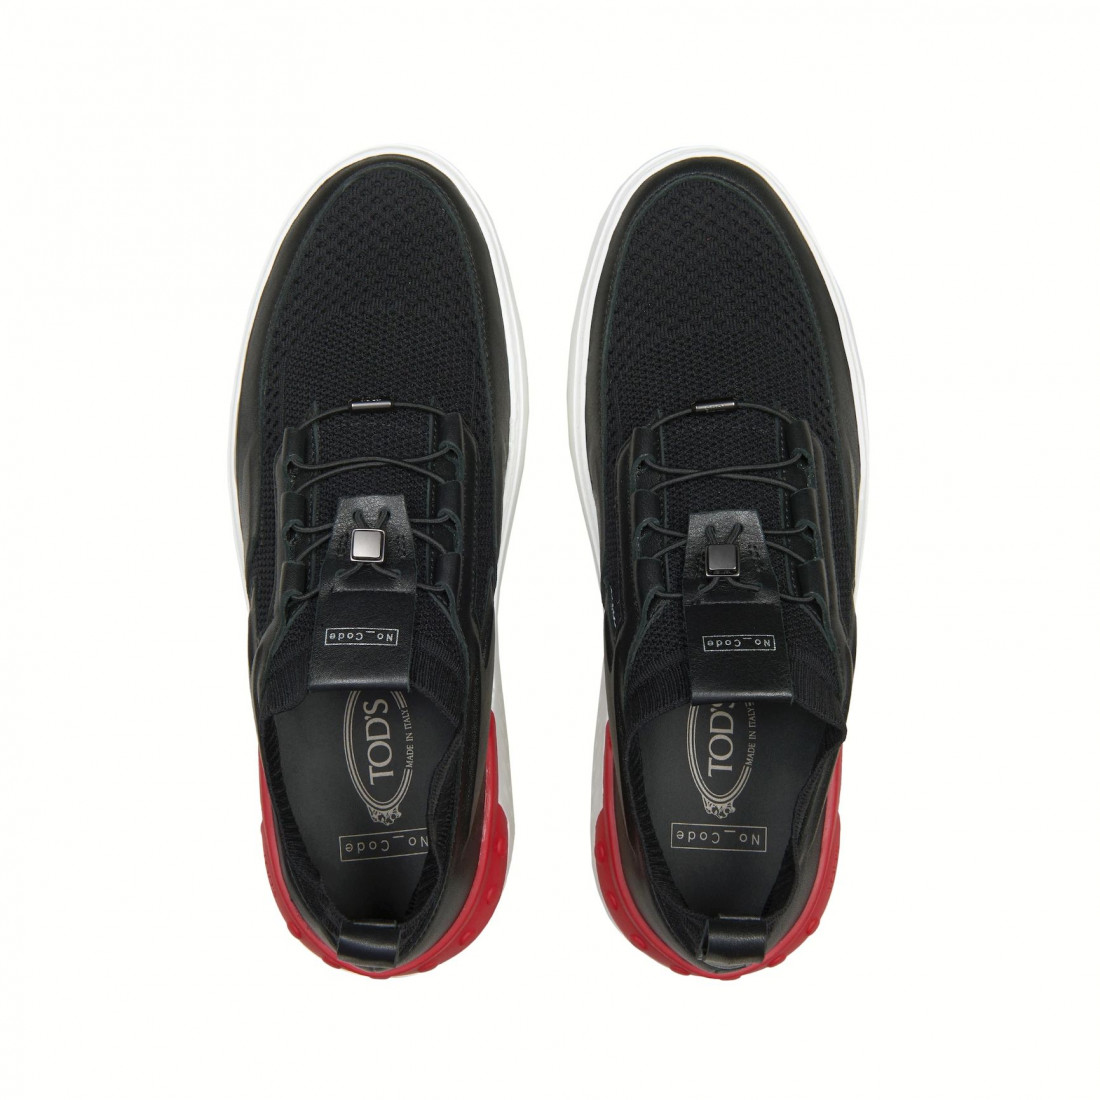 Men's Tod's No Code X sneakers in black and red leather and fabric